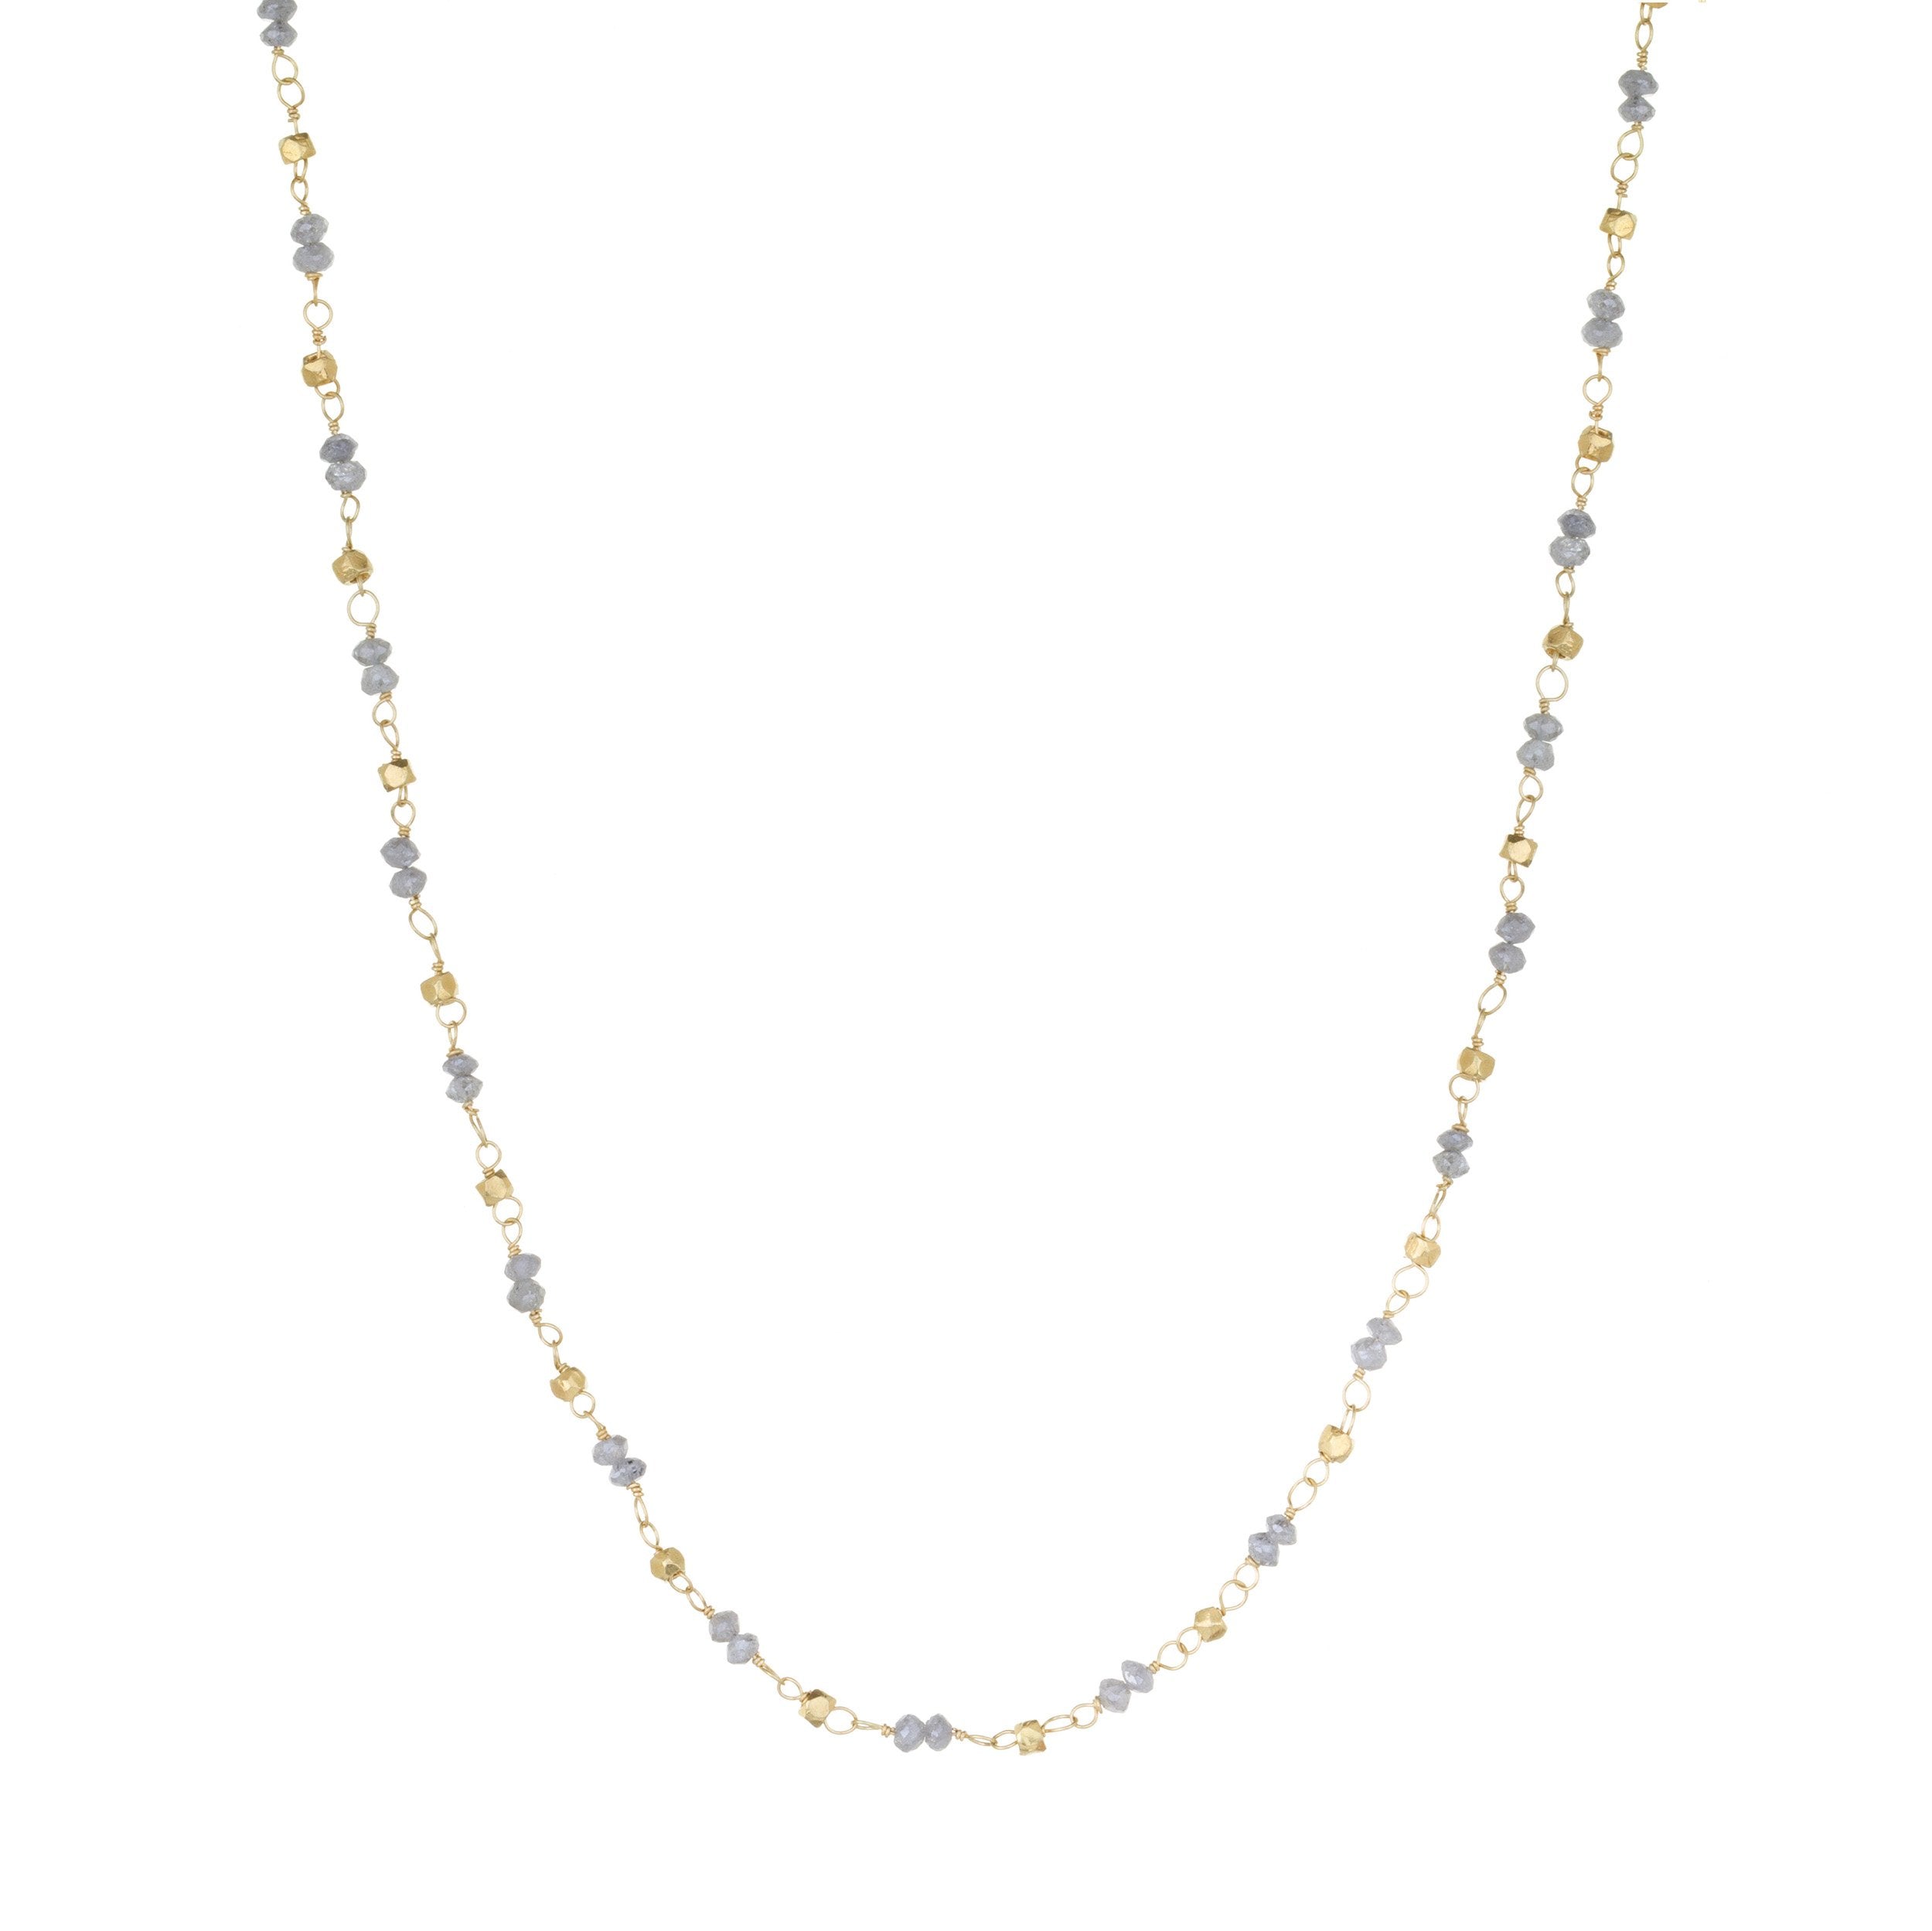 Leila Gray Diamond Chain with Gold Cubes